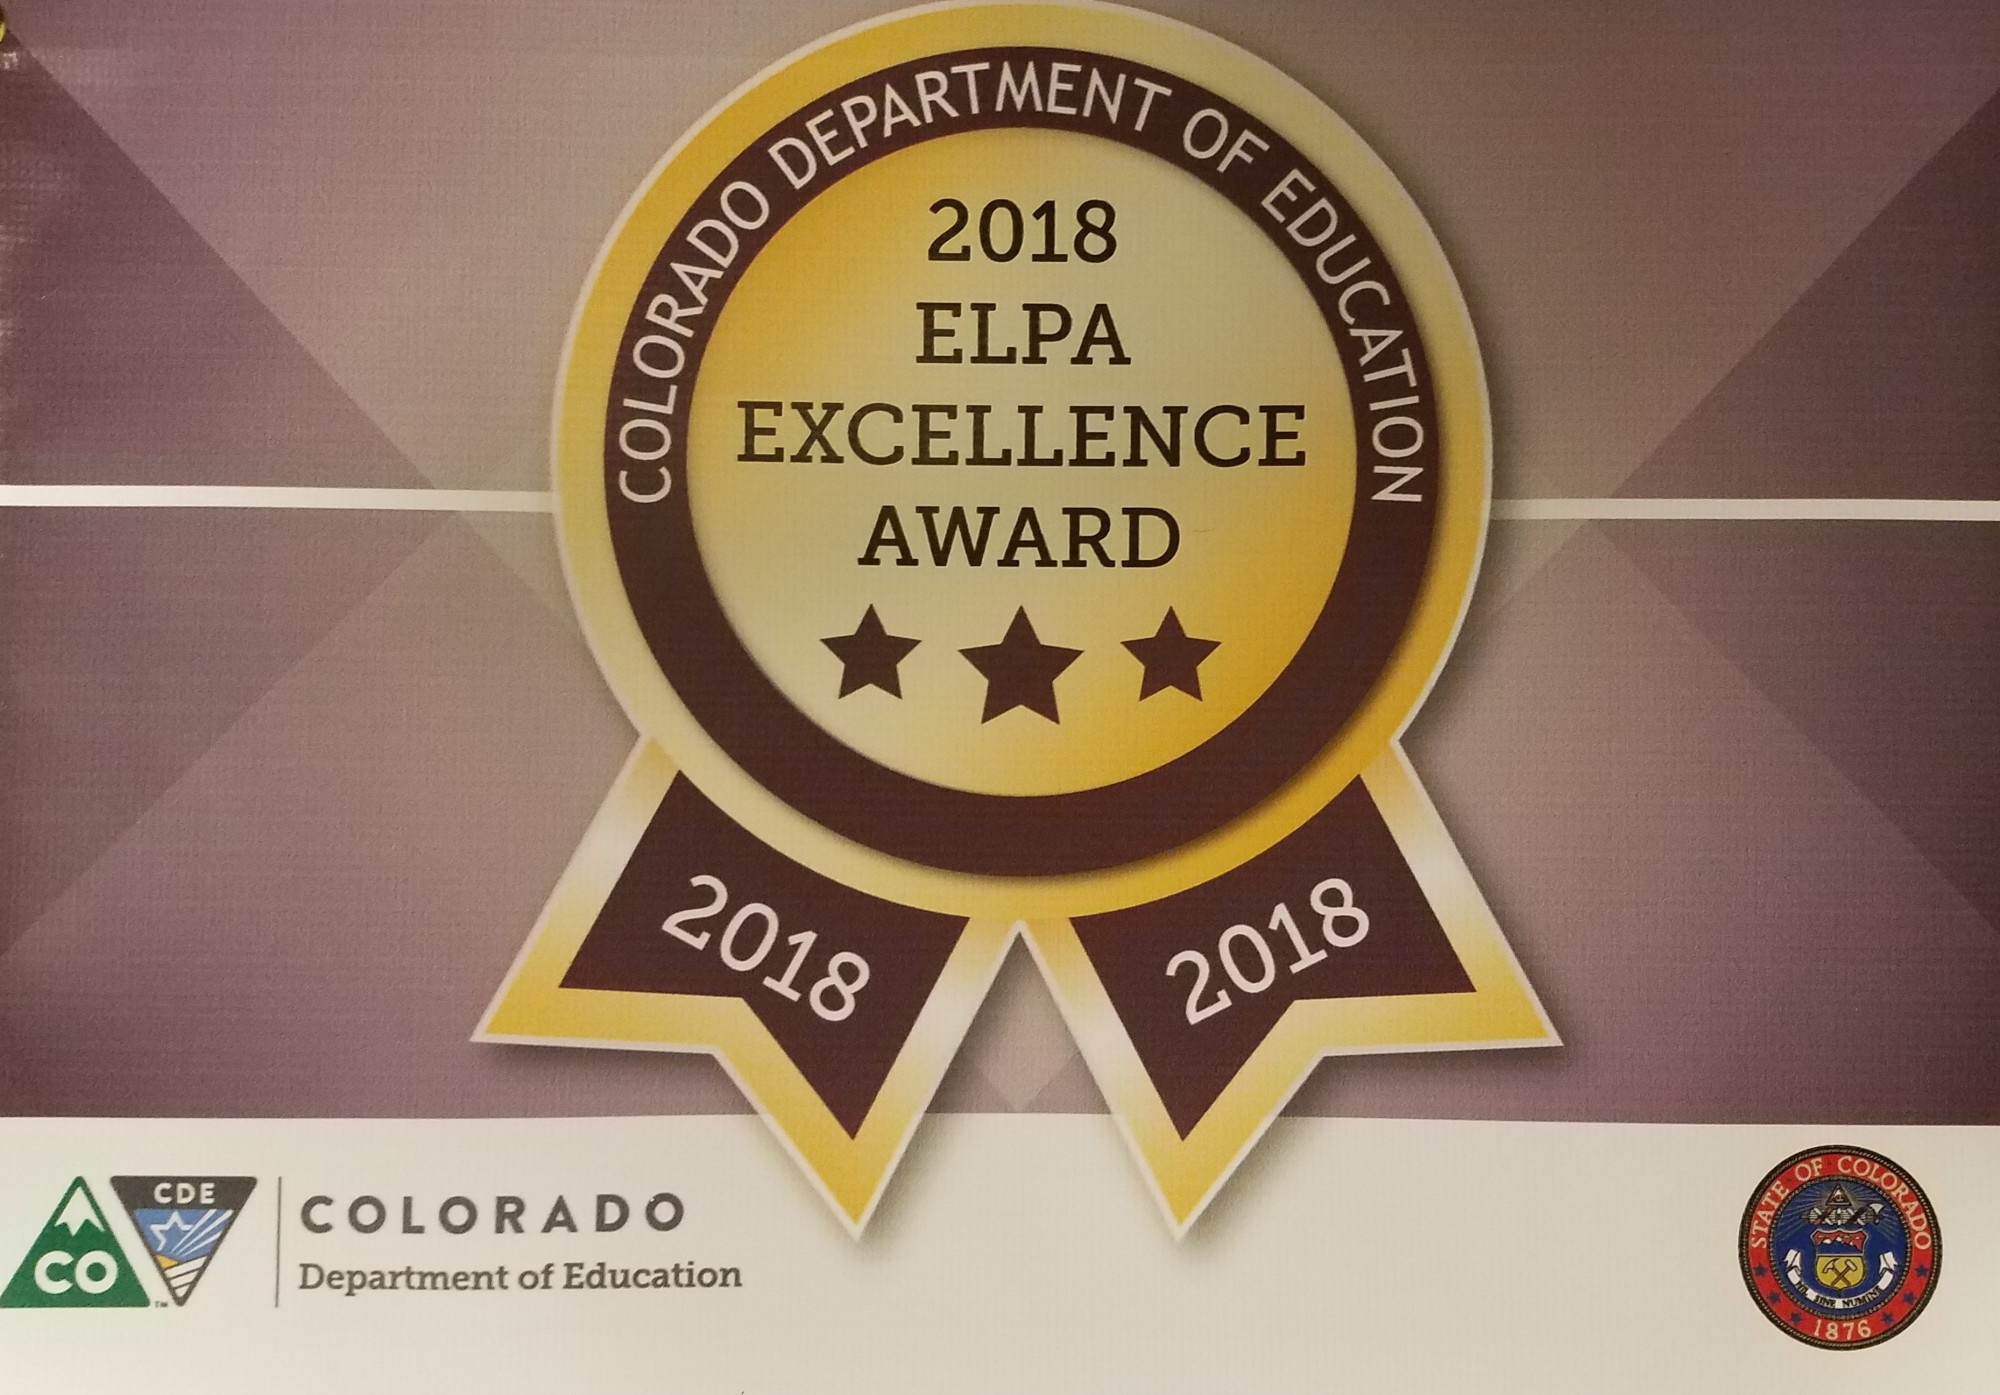 ELPA Excellence Award given to PSD's ELD program